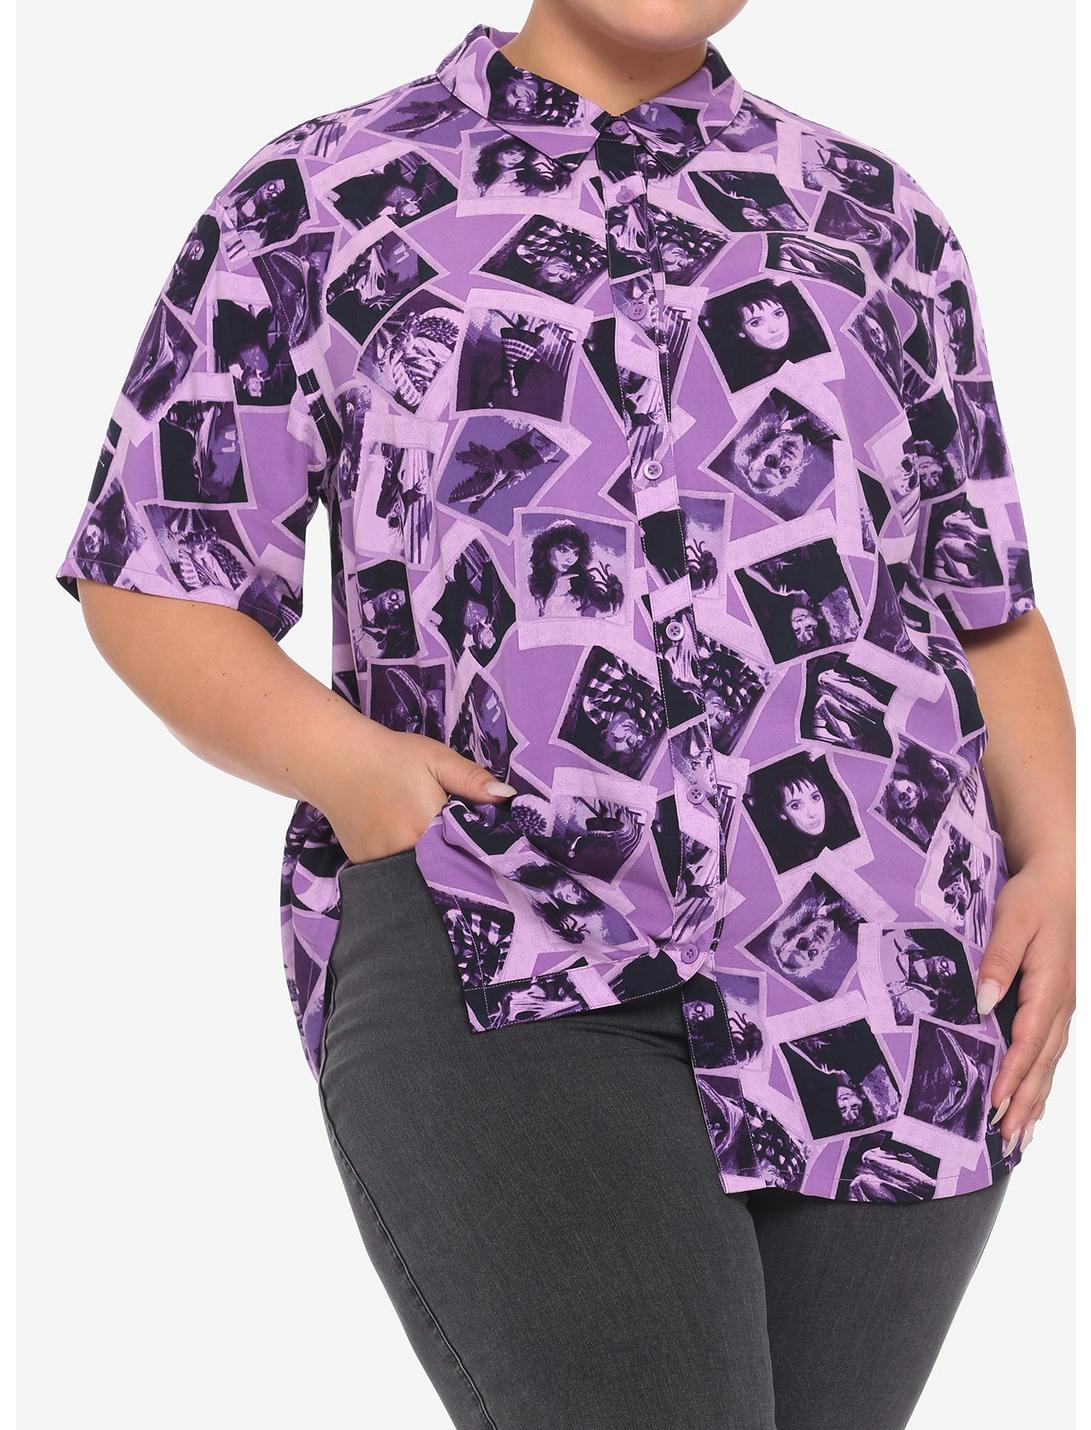 Beetlejuice Photos Oversized Girls Woven Button-Up Plus Size, MULTI, hi-res